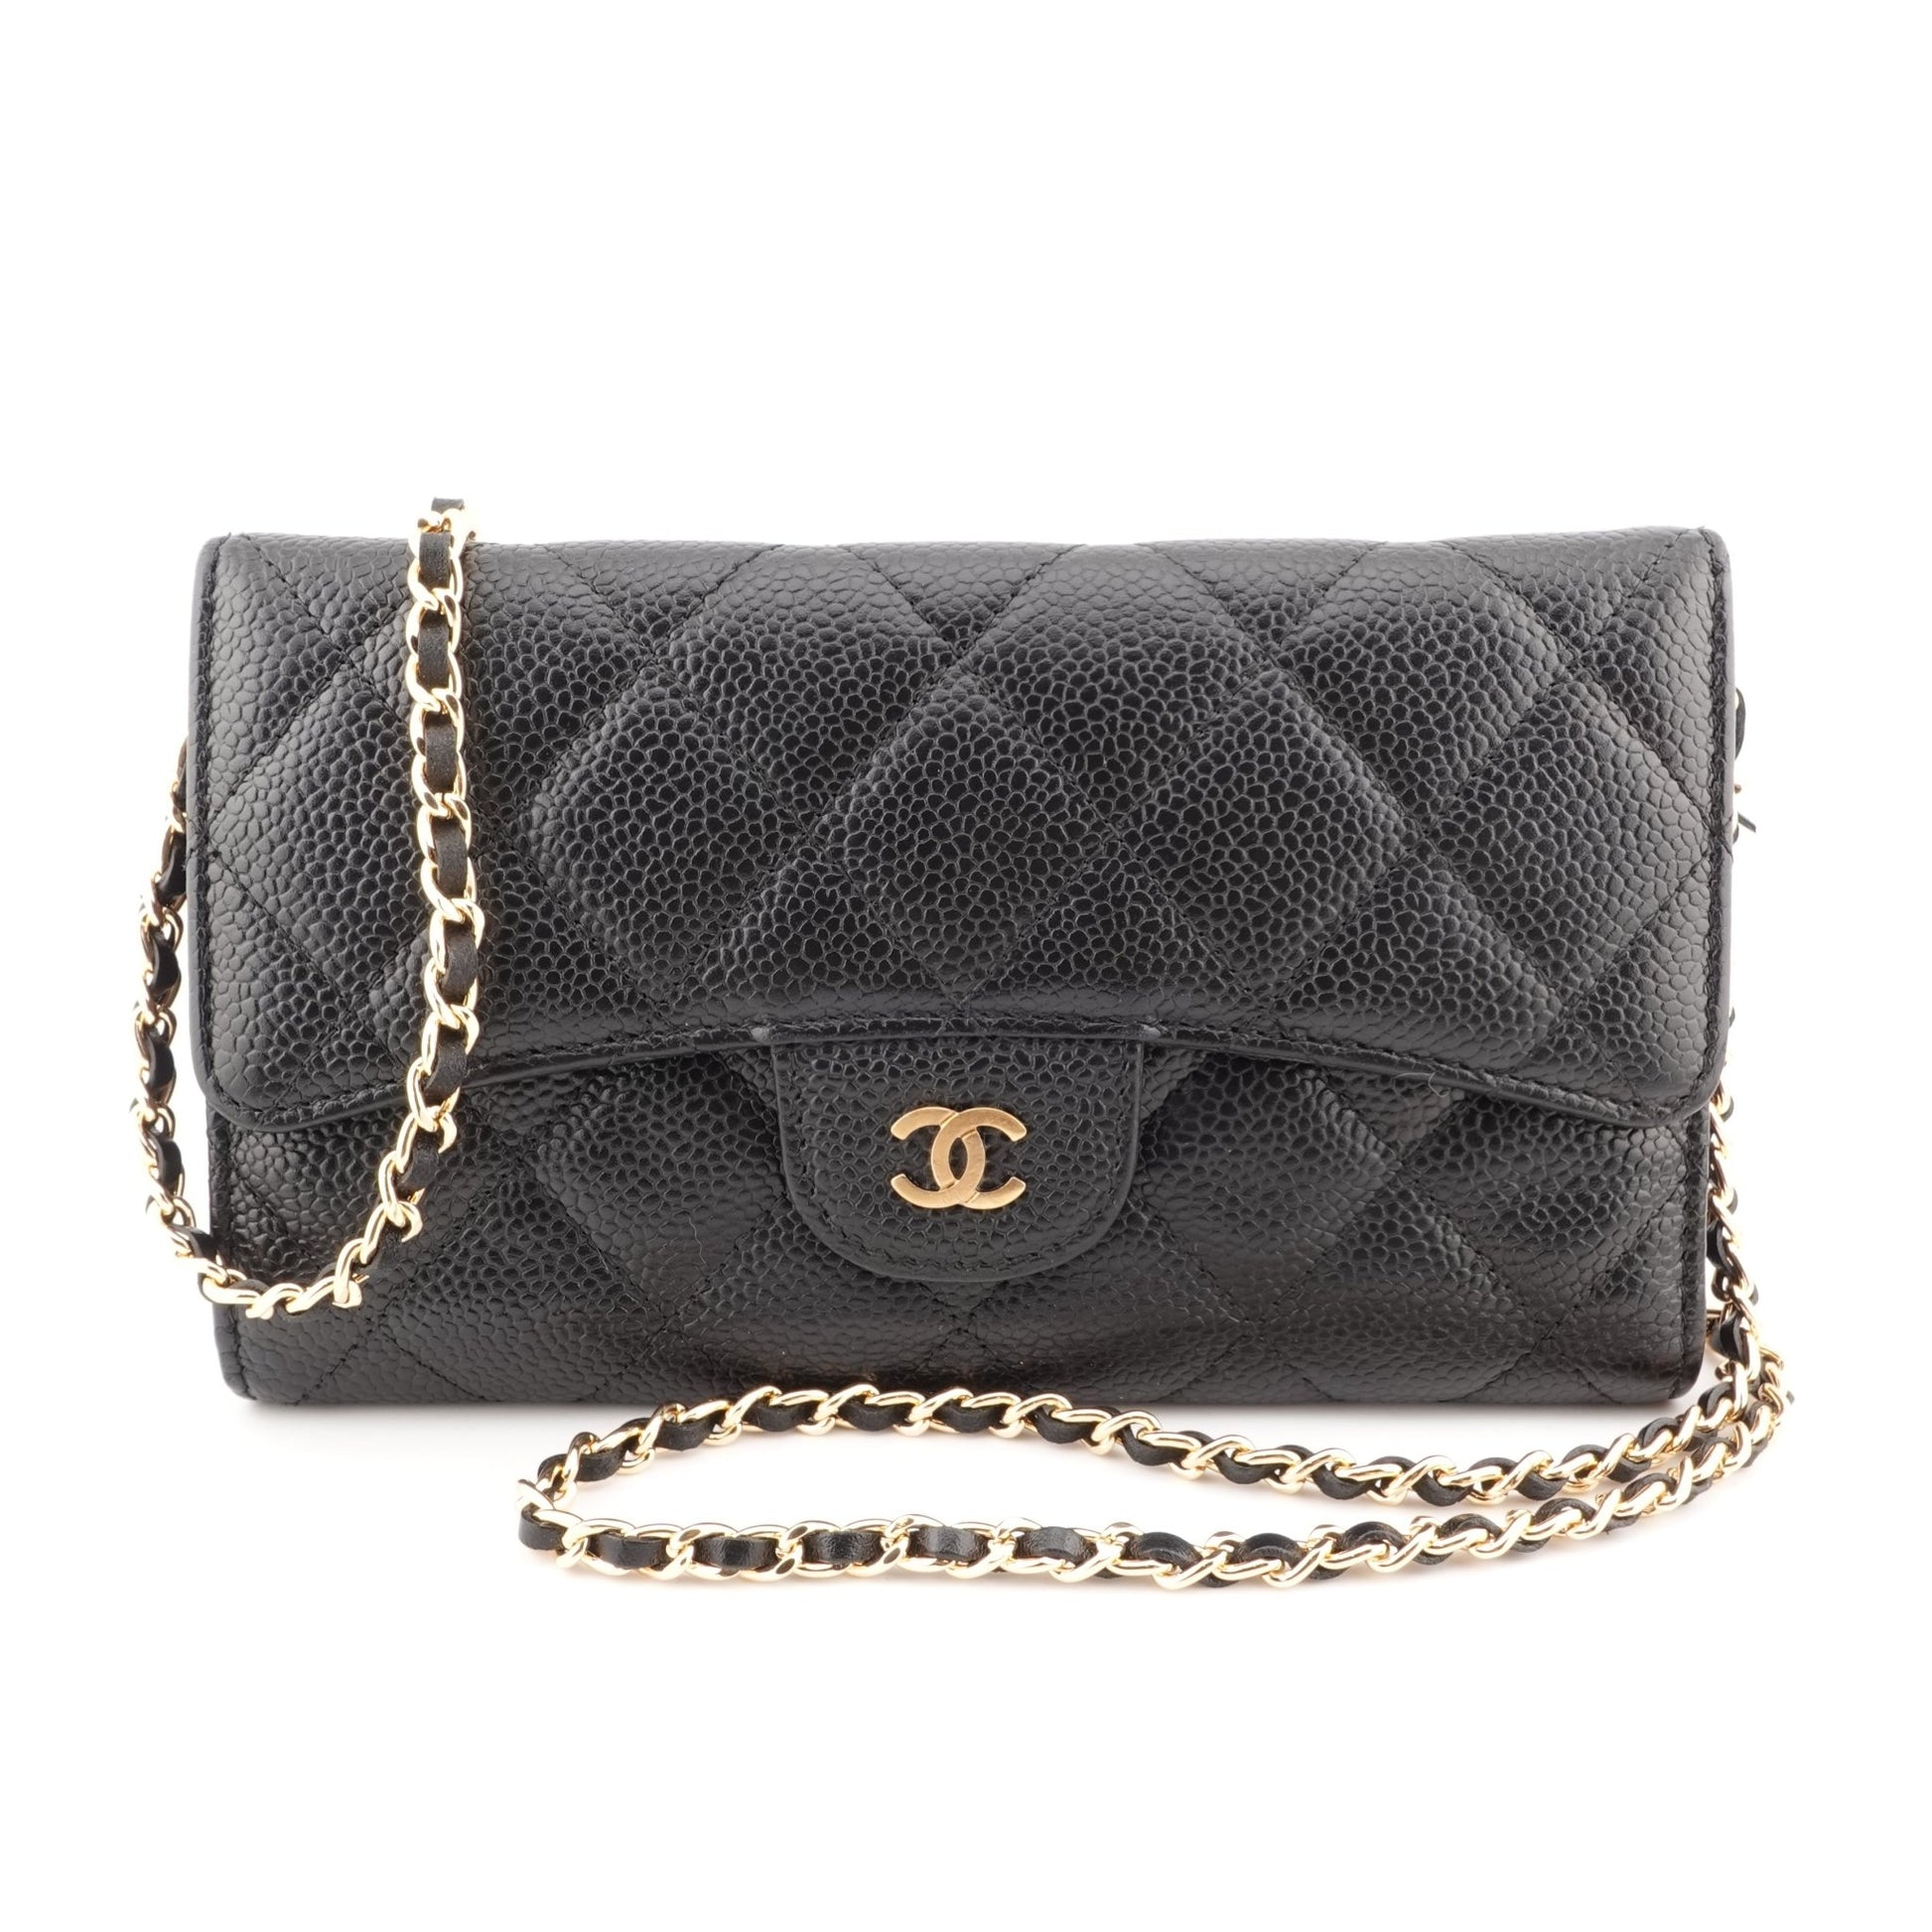 CHANEL Caviar Classic Flap Wallet with Chain - Bag Envy